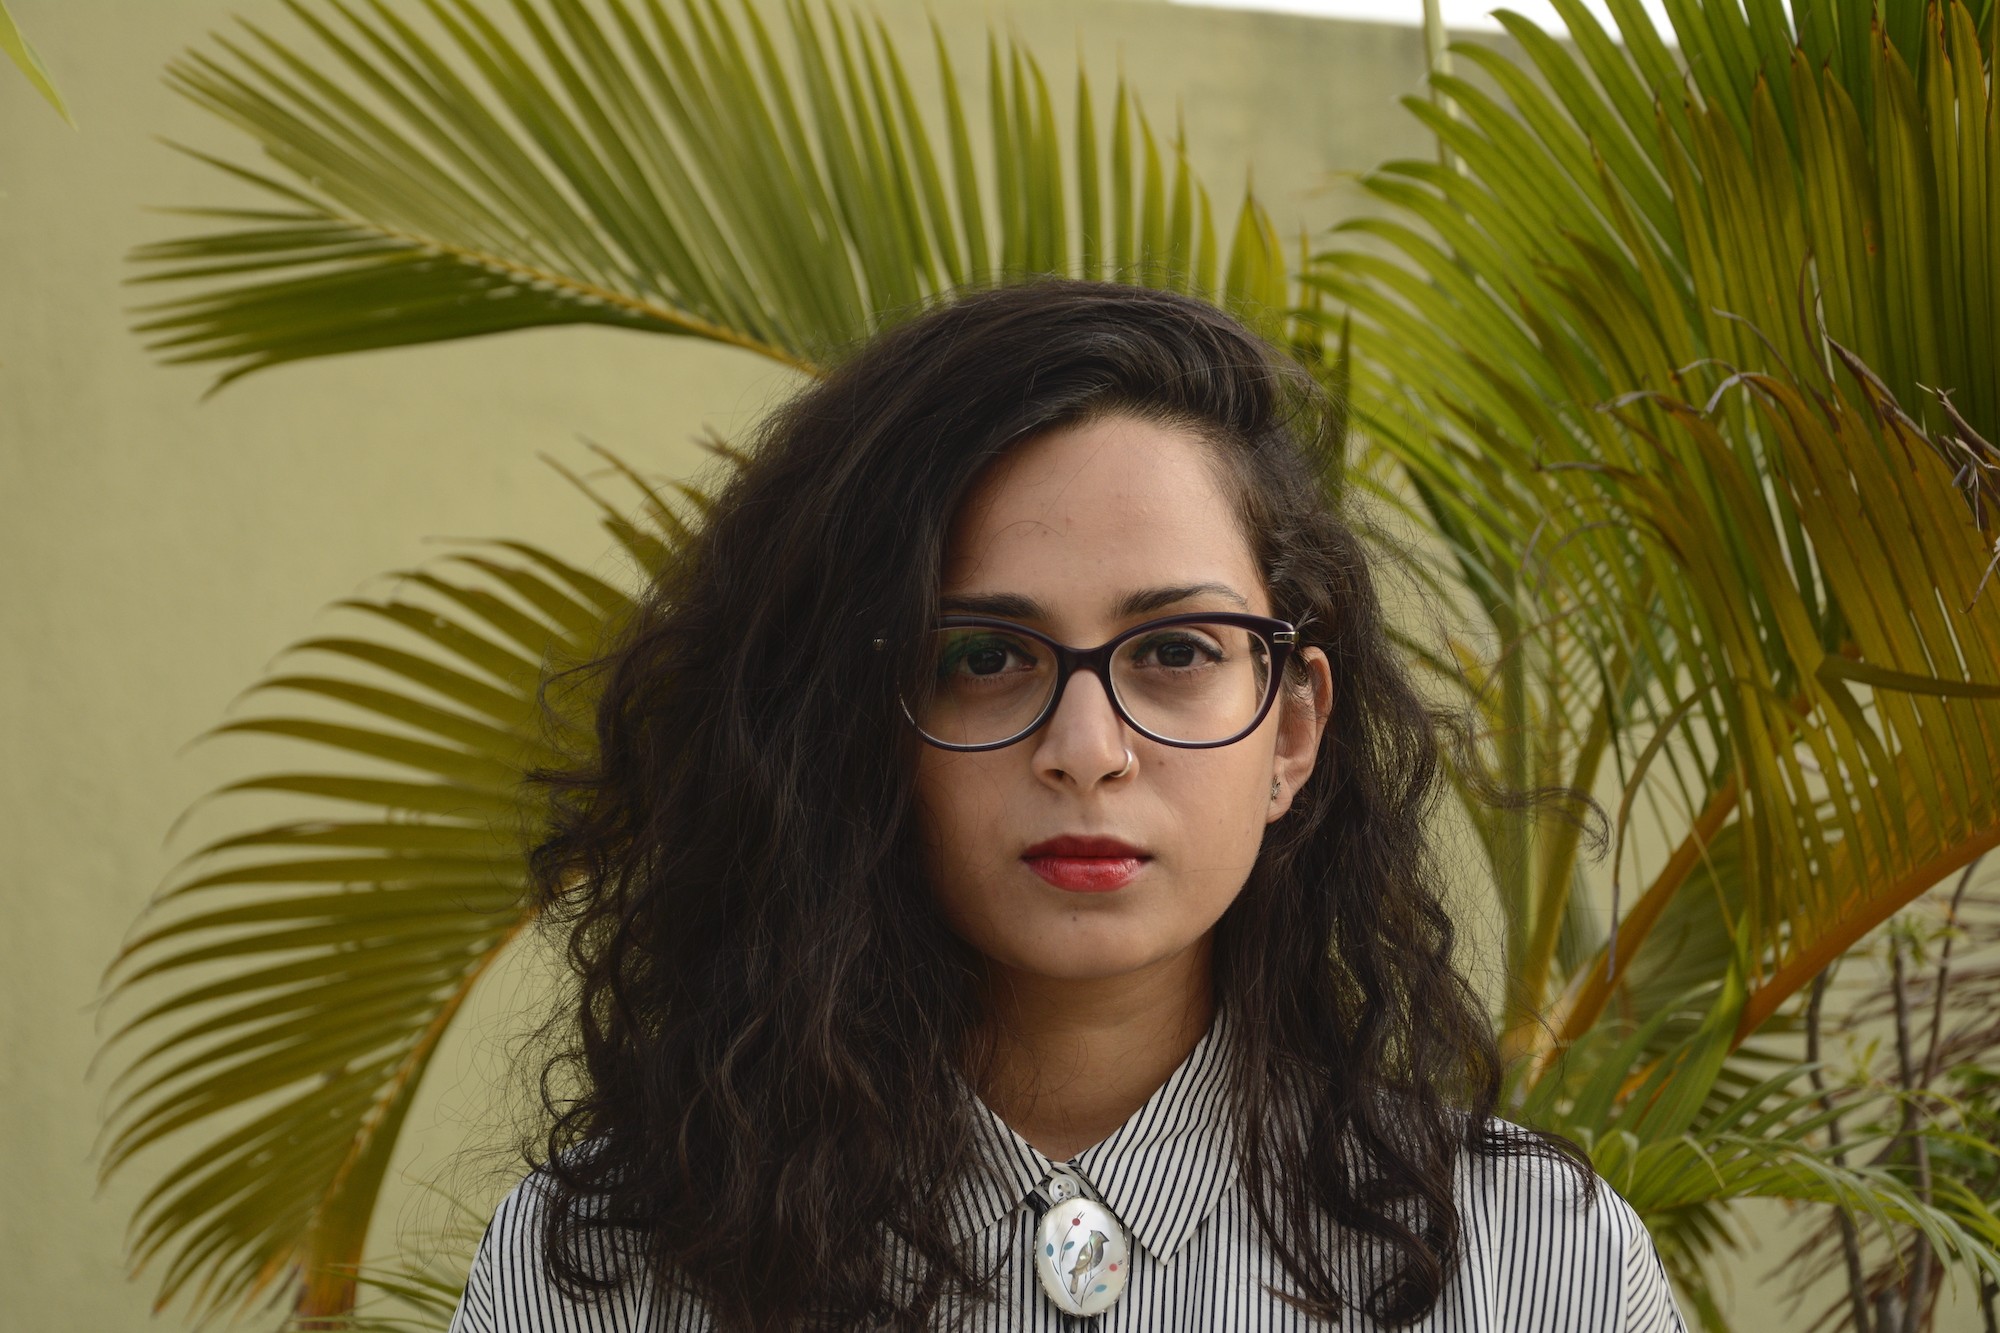 Aditi Machado stands in front of an areca palm, wearing red lipstick and black frame glasses.